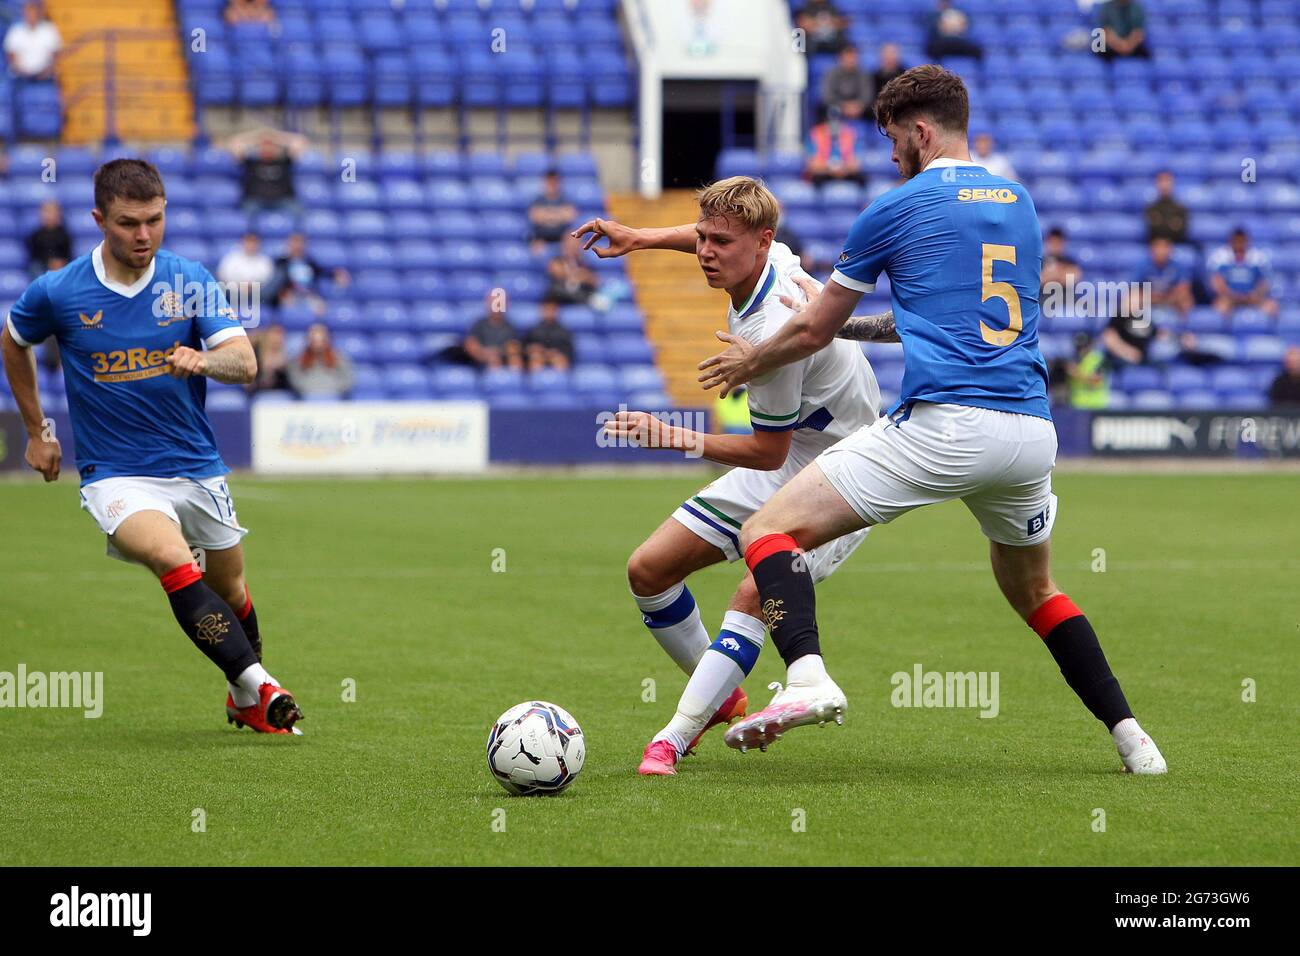 Birkenhead, UK. 10th July, 2021. Paul Glatzel of Tranmere Rovers plays the ball past Jack Simpson of Rangers during the Pre-Season Friendly match between Tranmere Rovers and Rangers at Prenton Park on July 10th 2021 in Birkenhead, England. (Photo by Richard Ault/phcimages.com) Credit: PHC Images/Alamy Live News Stock Photo